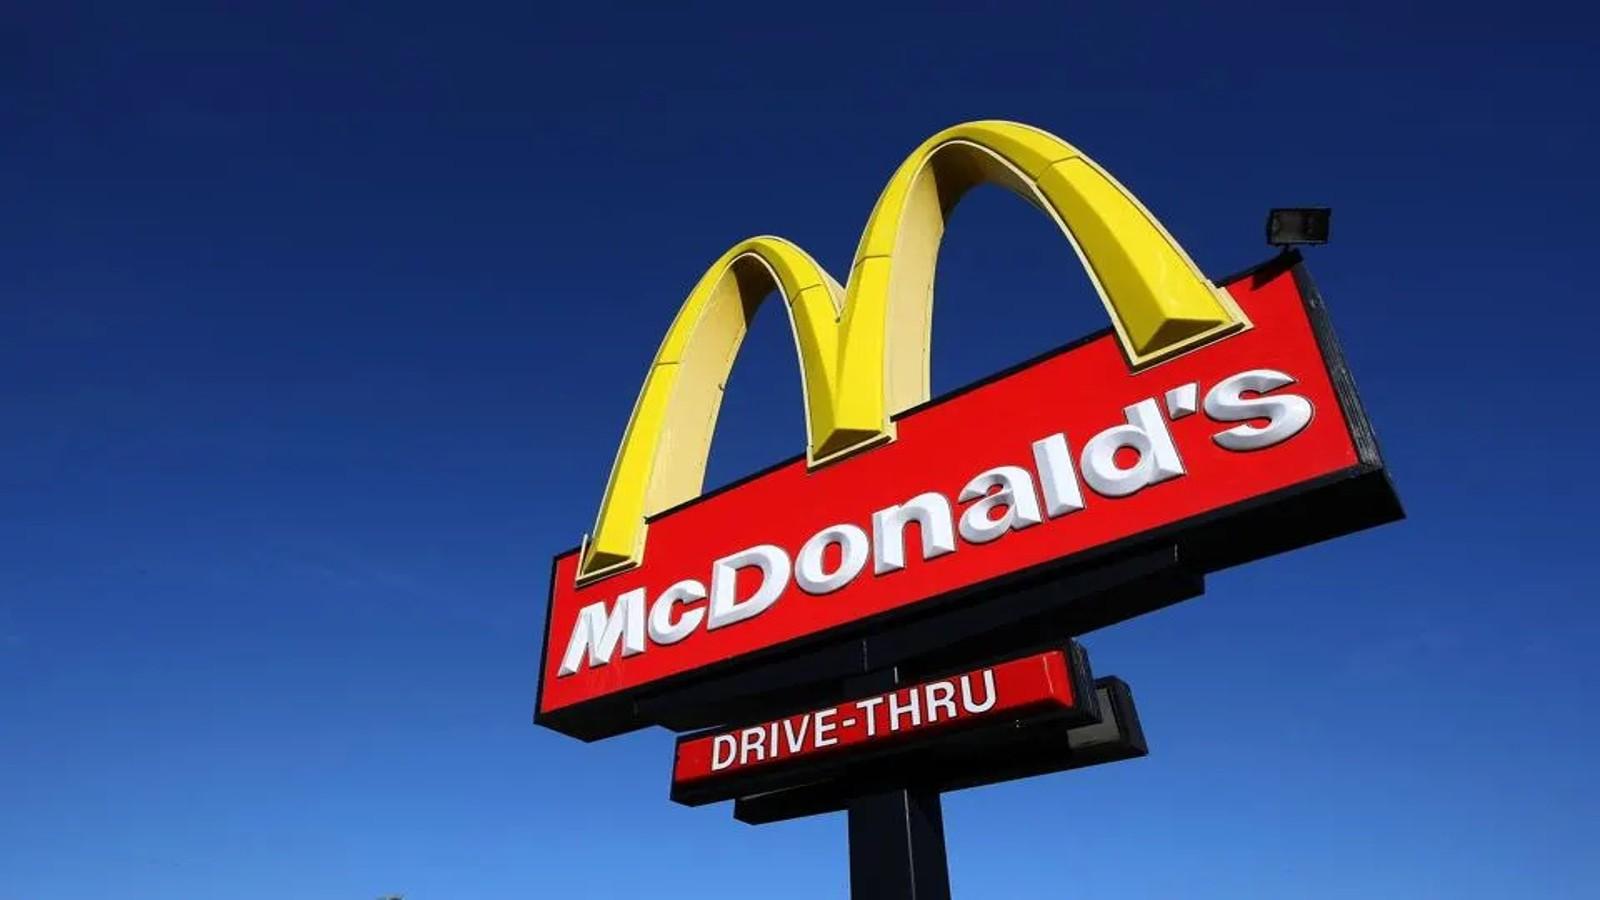 A low-angle photo of the Mcdonald's sign against a blue sky background.